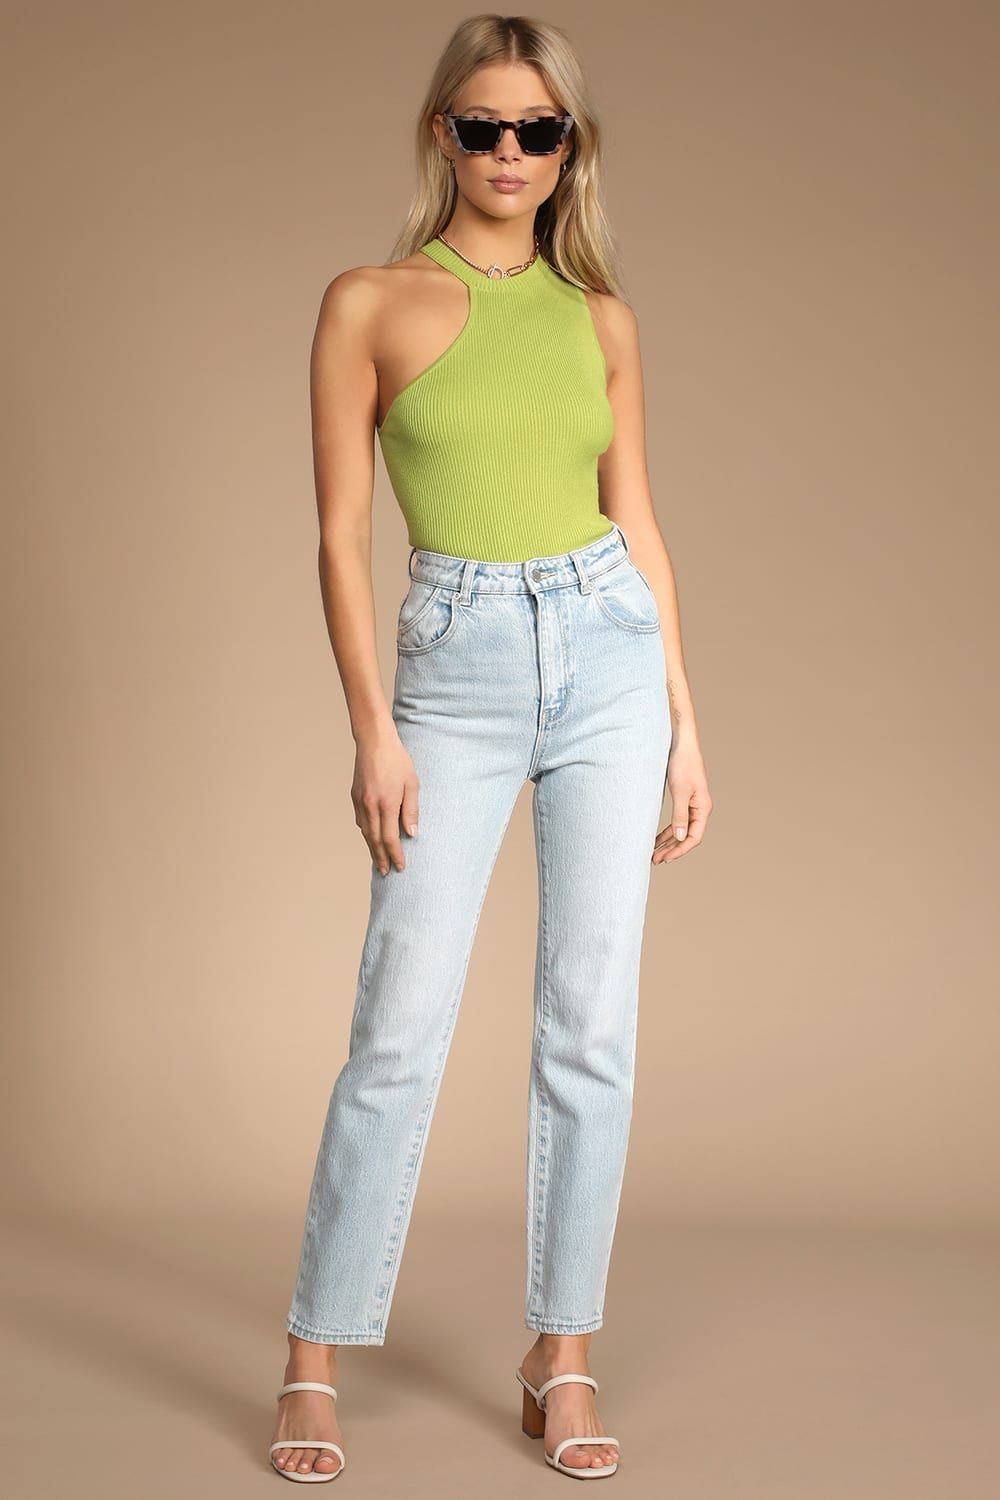 On Your Good Side Lime Green Ribbed Knit Asymmetrical Bodysuit | Lulus (US)